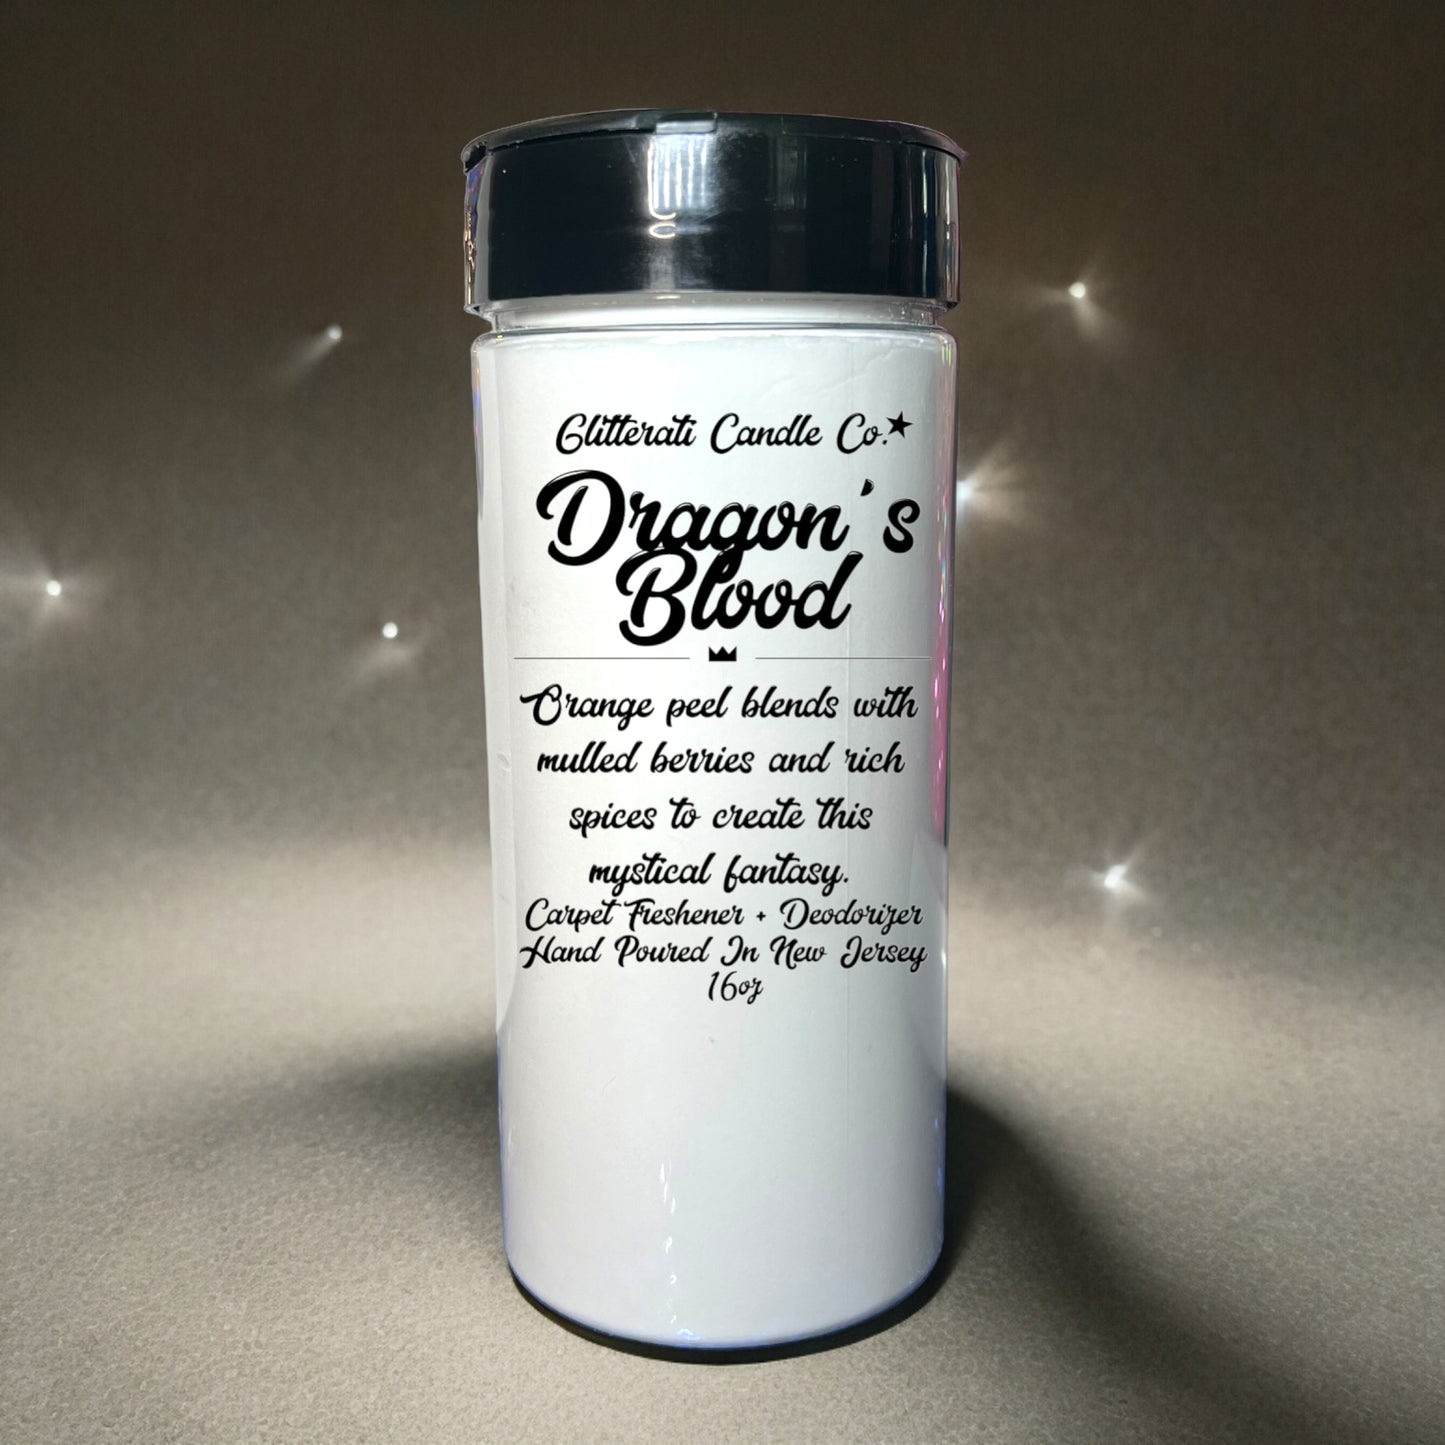 Dragon's Blood All Natural Heavily Scented Carpet Freshener & Deodorizer